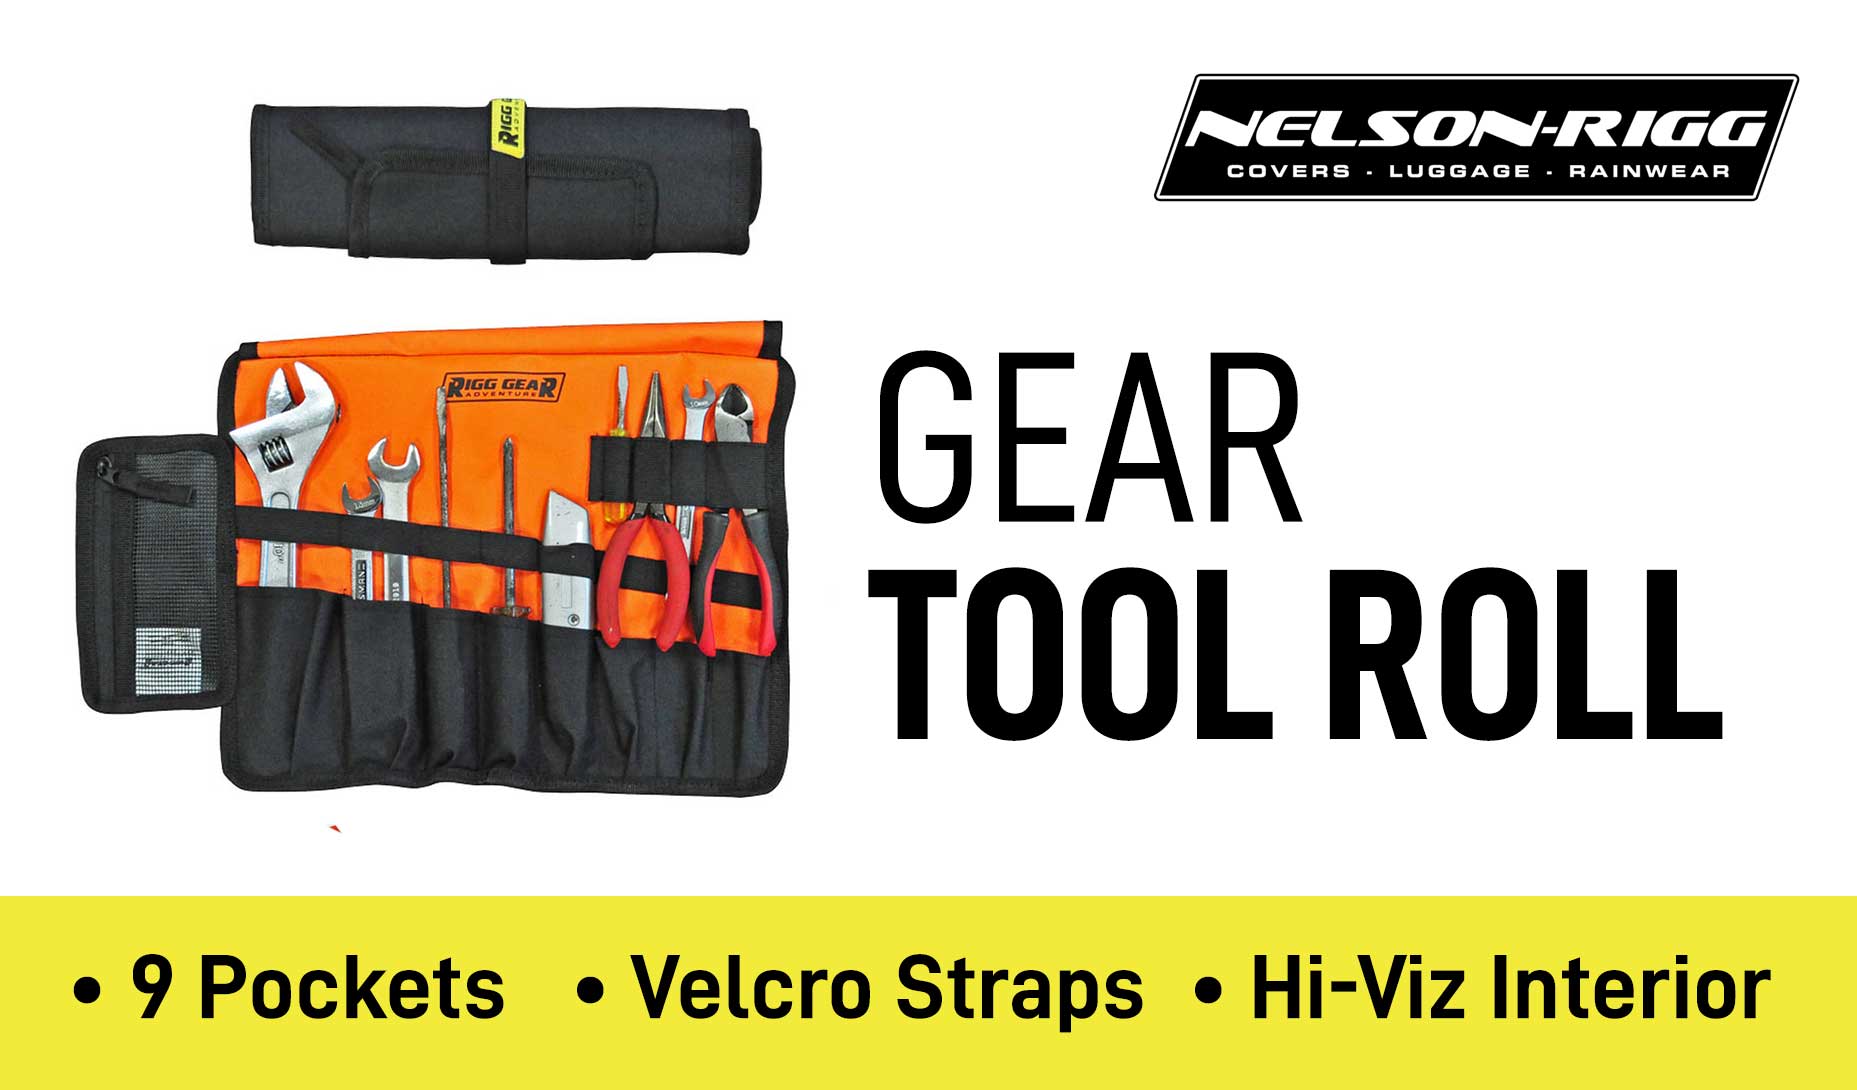 Nelson Rigg Gear Tool Roll Pictures